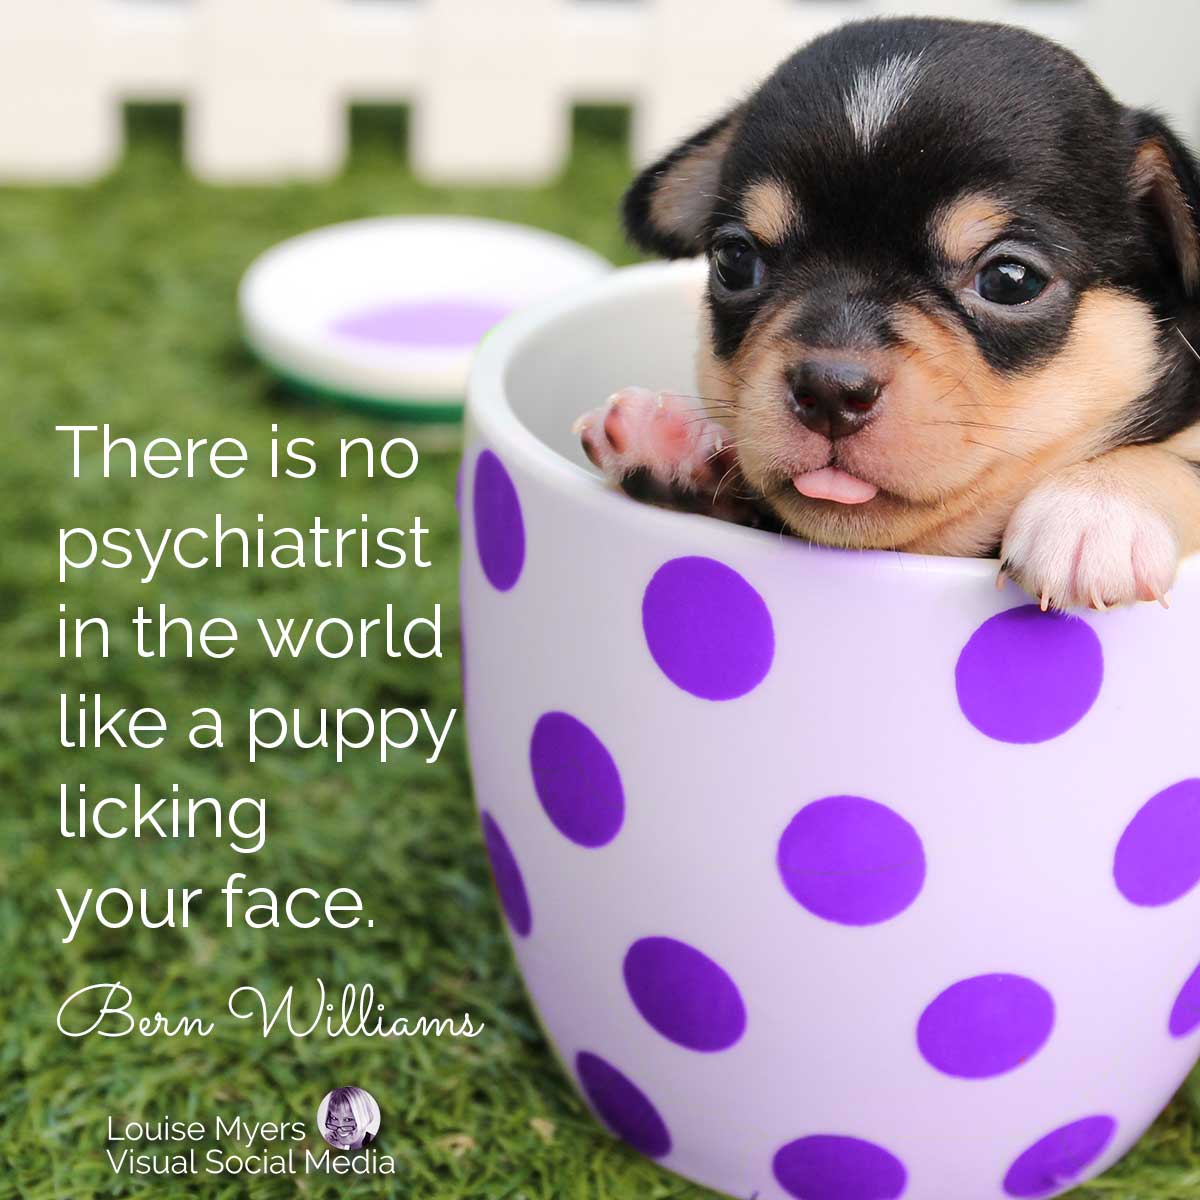 social media graphic for march 23 holiday national puppy day.